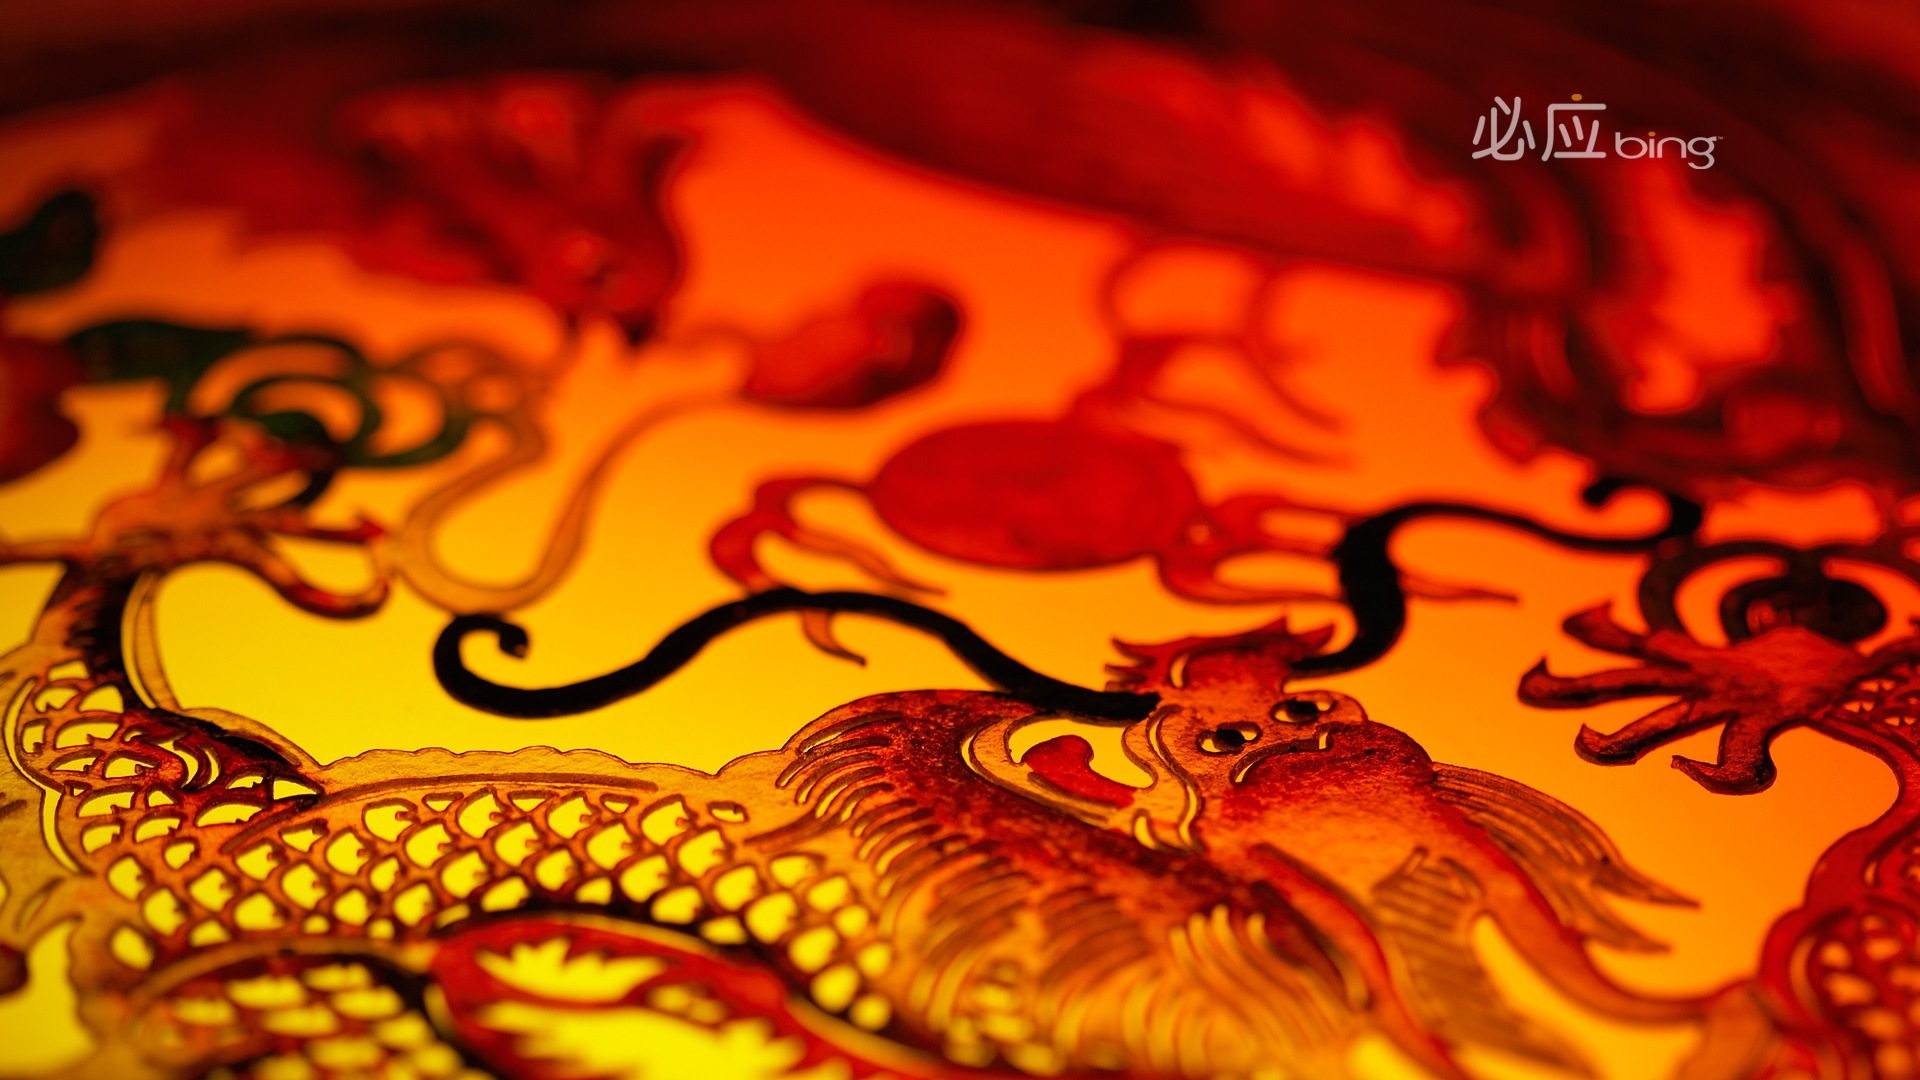 Bing selection best HD wallpapers: China theme wallpaper (2) #12 - 1920x1080